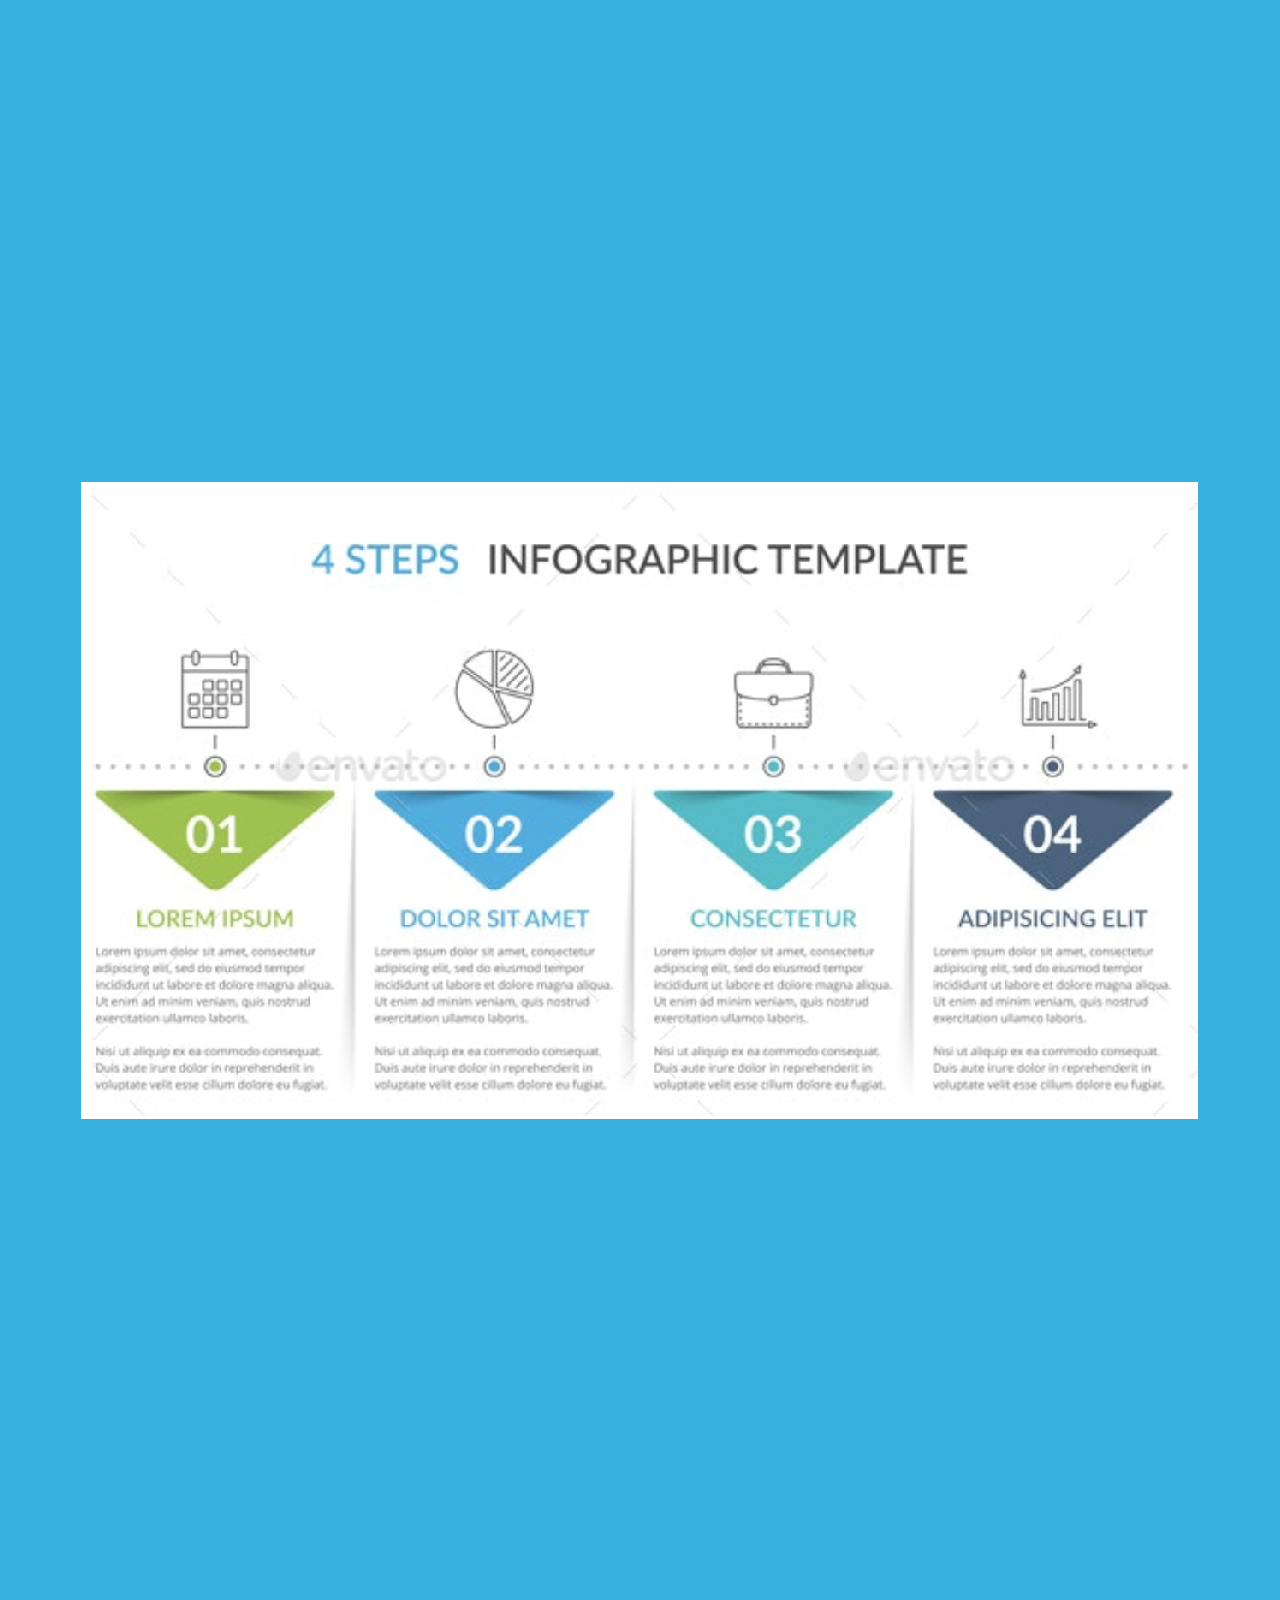 4 steps infographic template pinterest image.